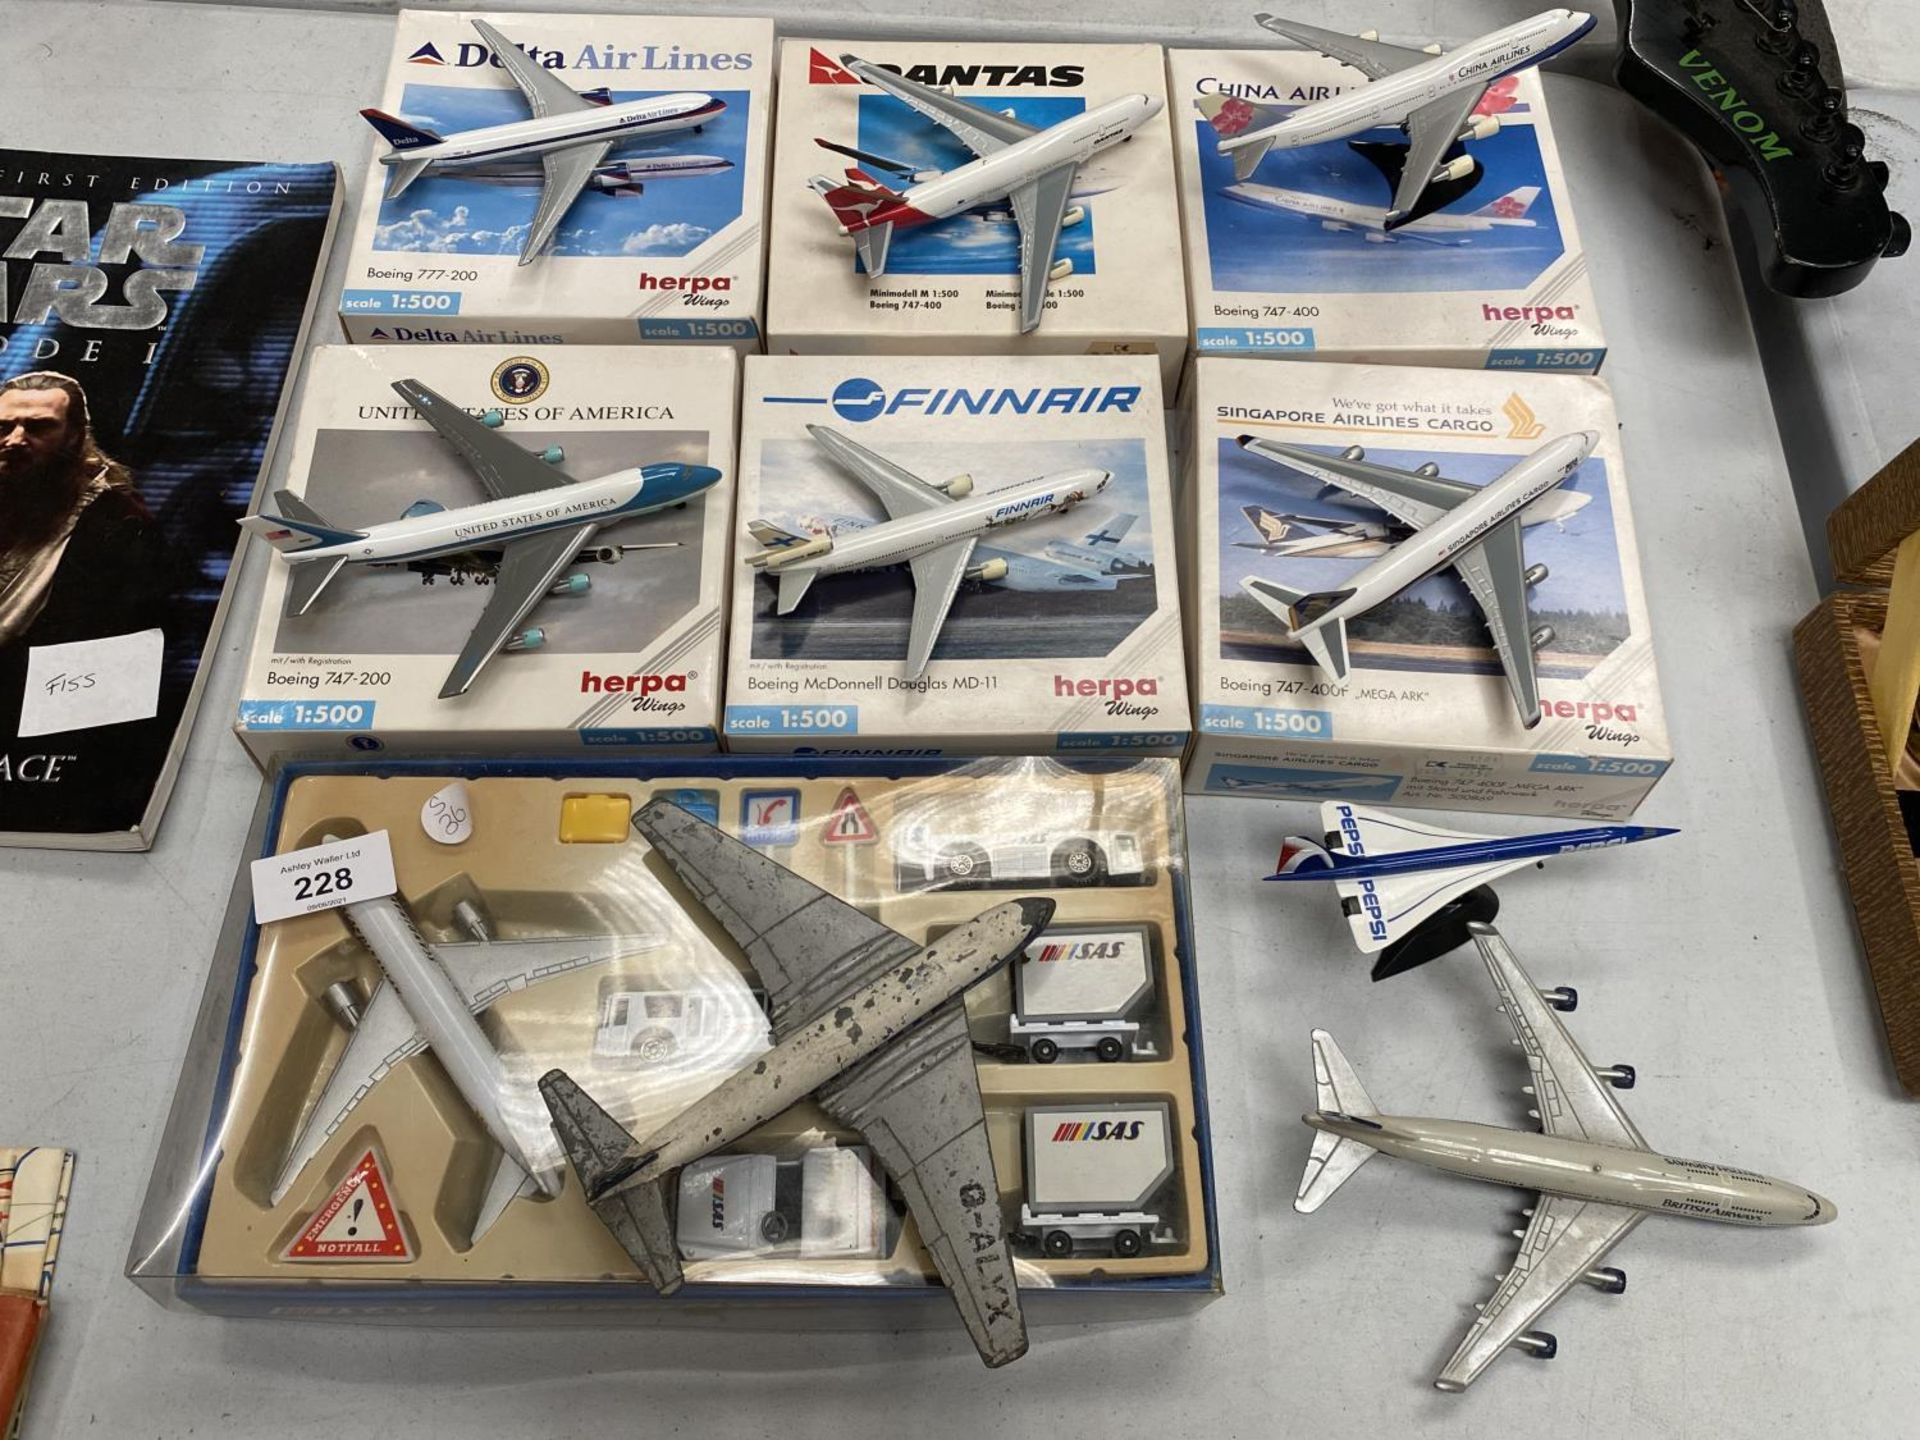 A COLLECTION OF MODEL AIRCRAFT MODELS